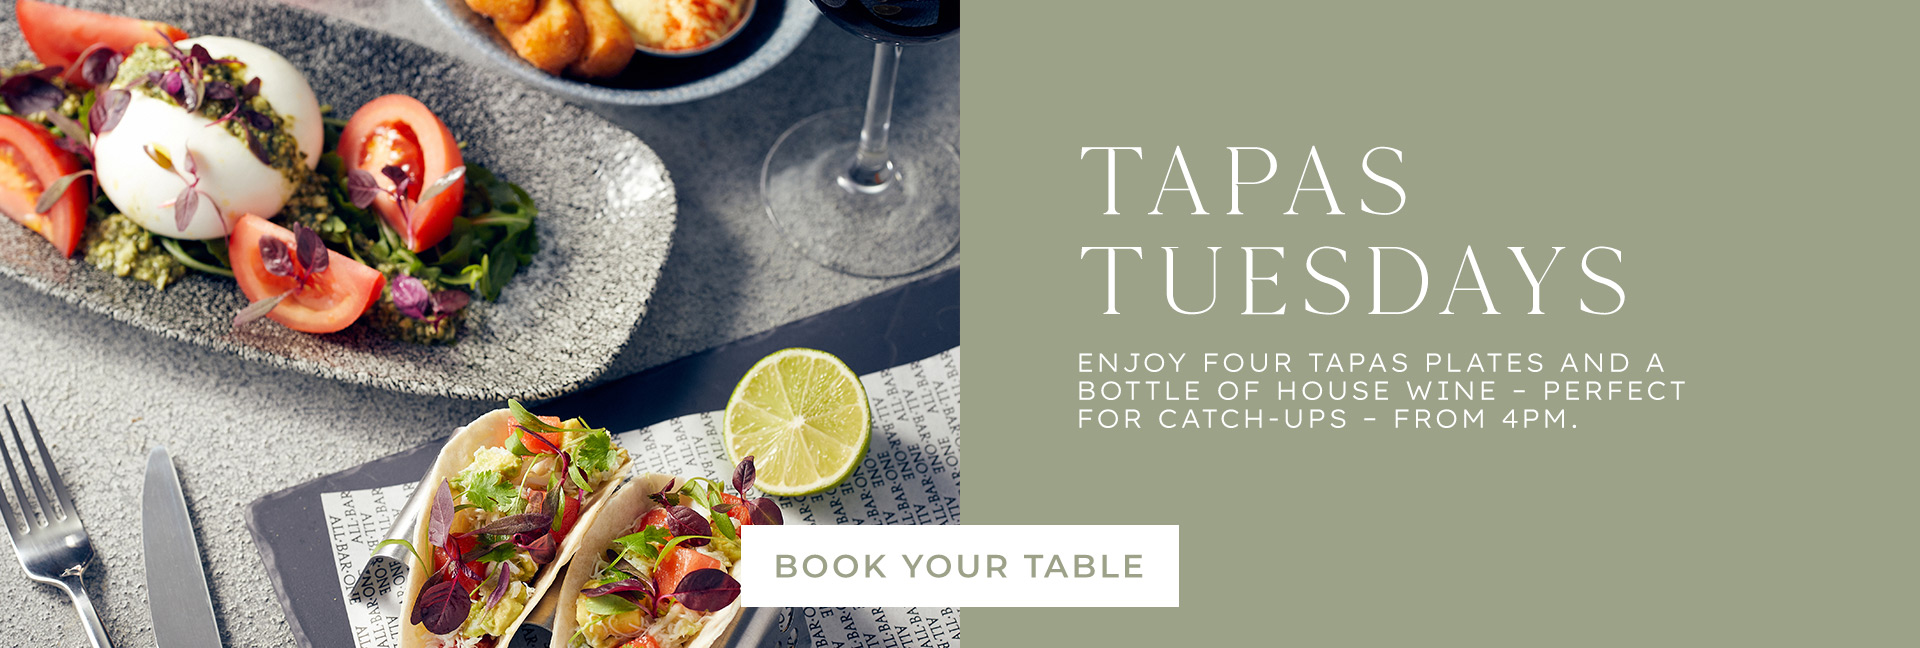 Tapas Tuesday at All Bar One York - Book now